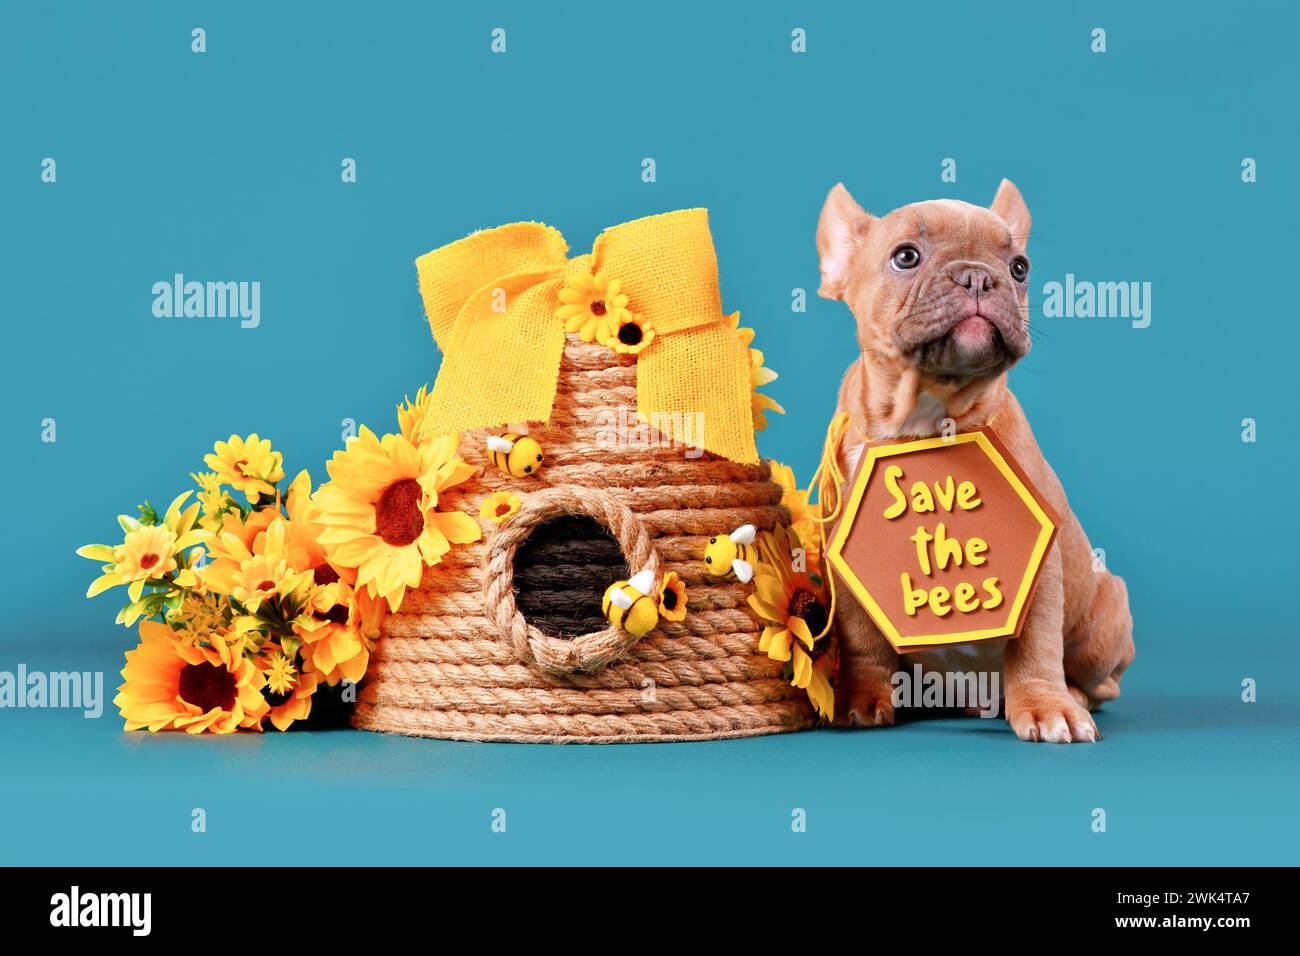 Fawn French Bulldog dog puppy with 'Save the bees' sign next to beehive and flowers on teal blue background Stock Photo